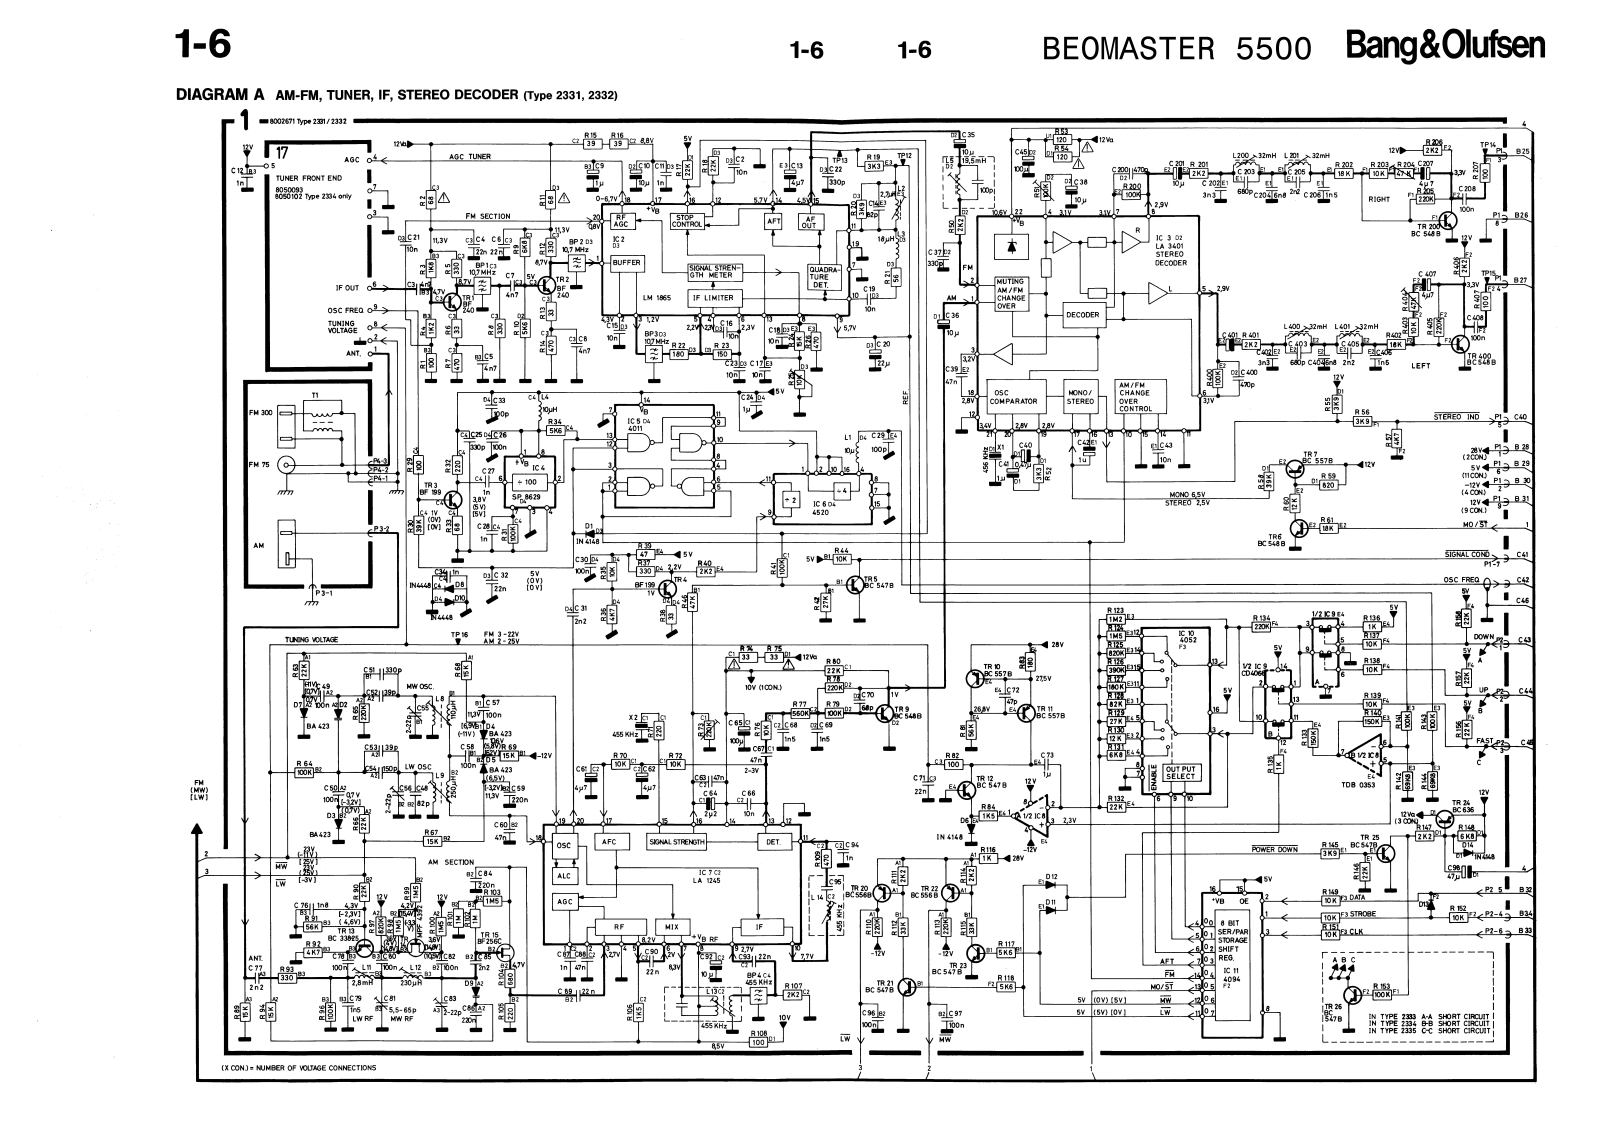 Bang and Olufsen Beomaster 5500 Schematic